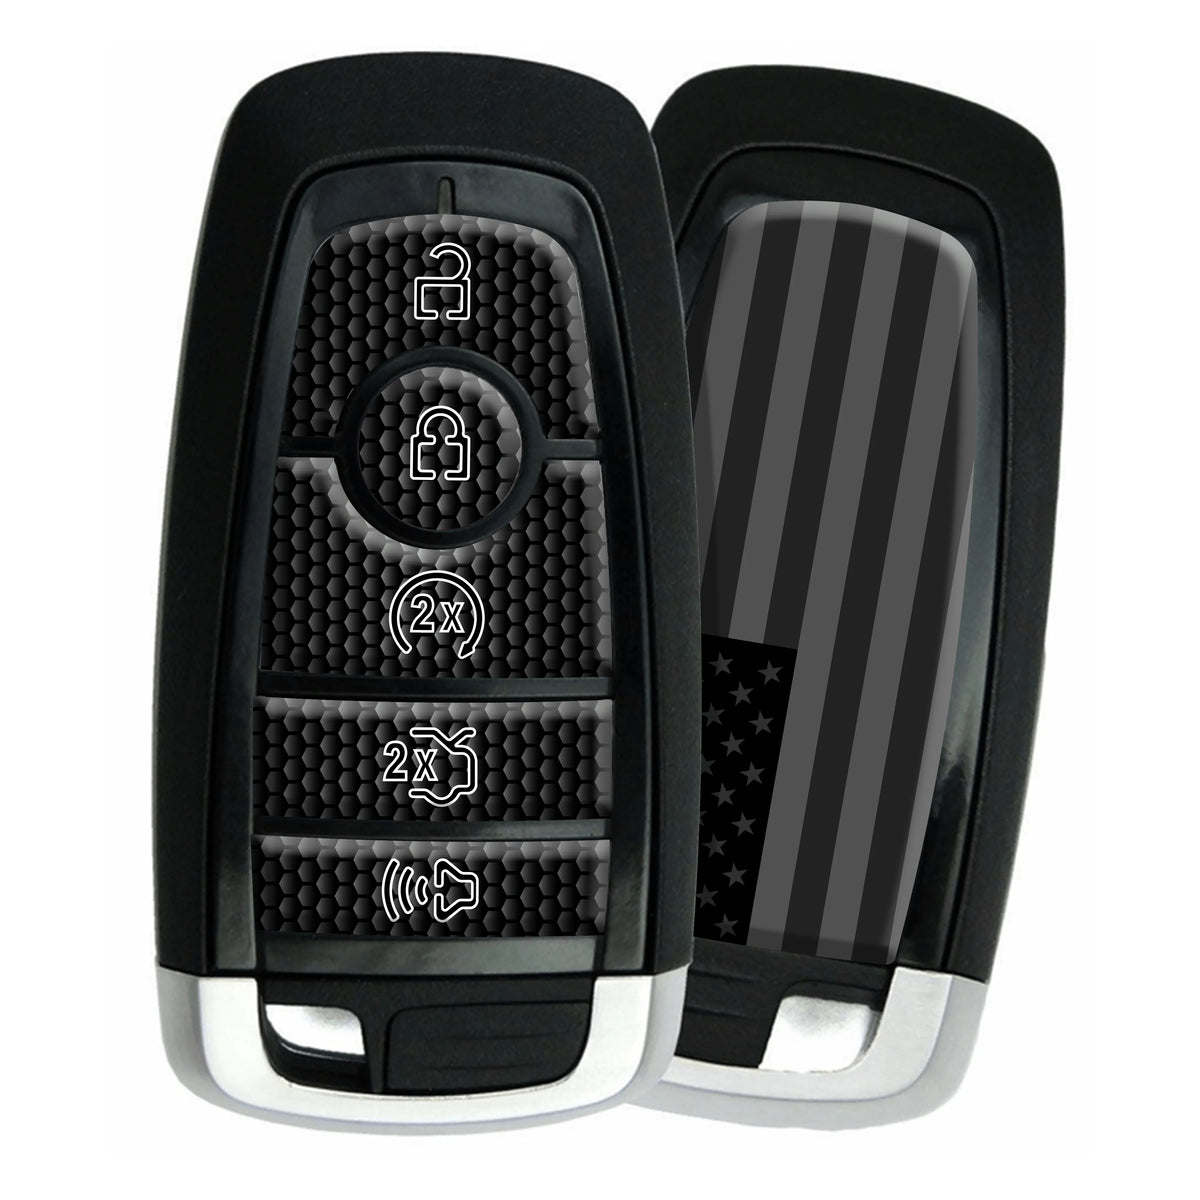 Key Fob Overlay Kit - All Buttons and Black American Flag Back - Fits Many Ford® Vehicles - Multiple Colors Available